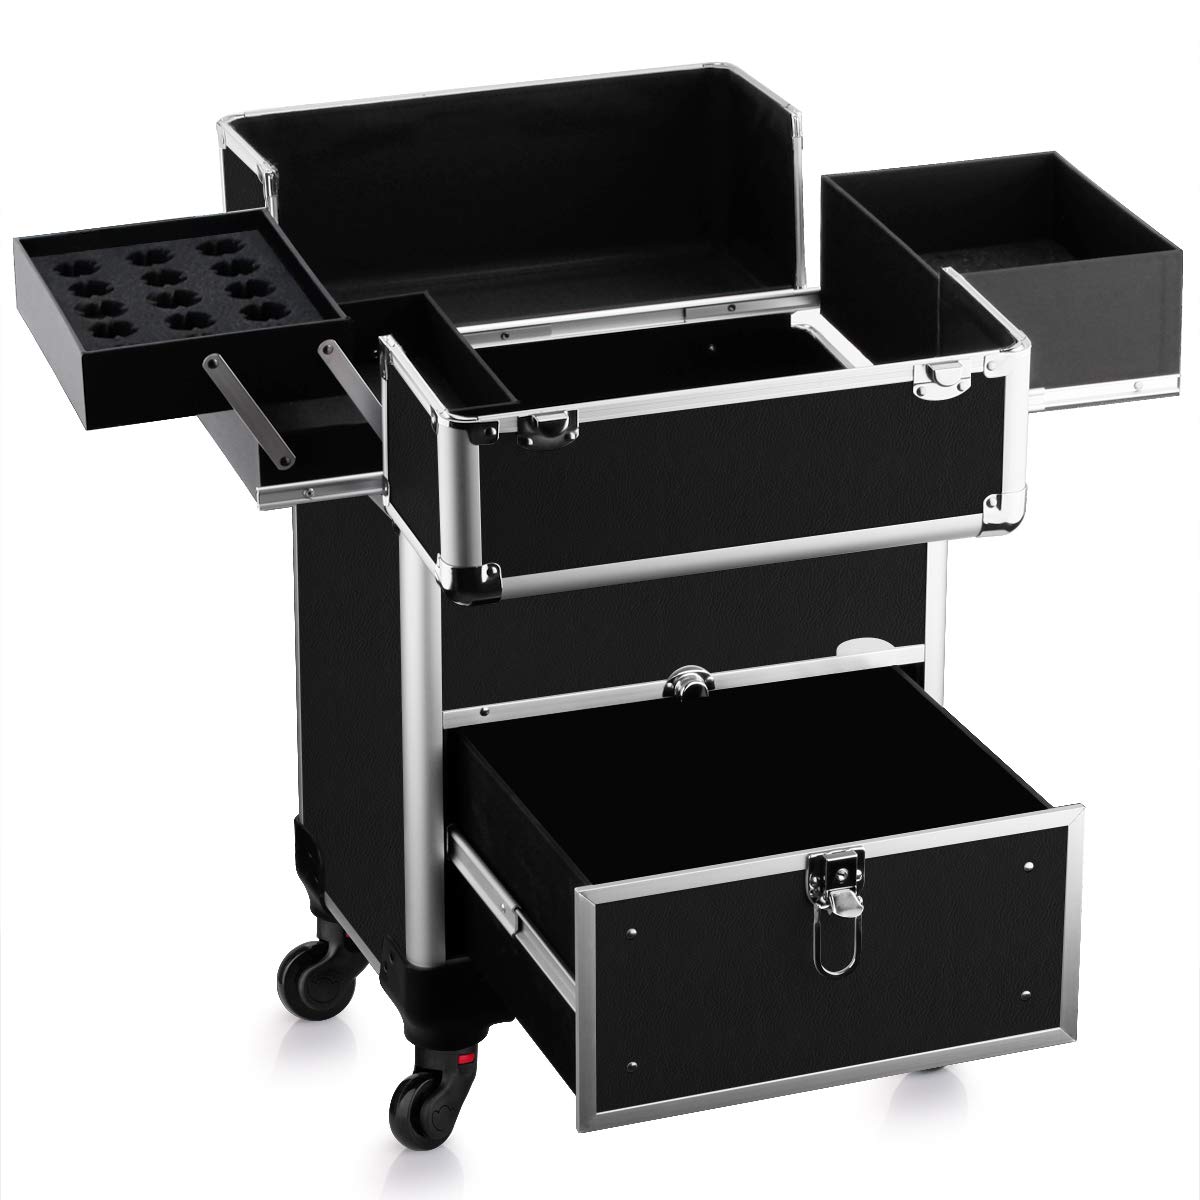 OUDMAY Makeup Case - Aluminum Professional Rolling Cosmetic Storage Box With Drawer and Locks